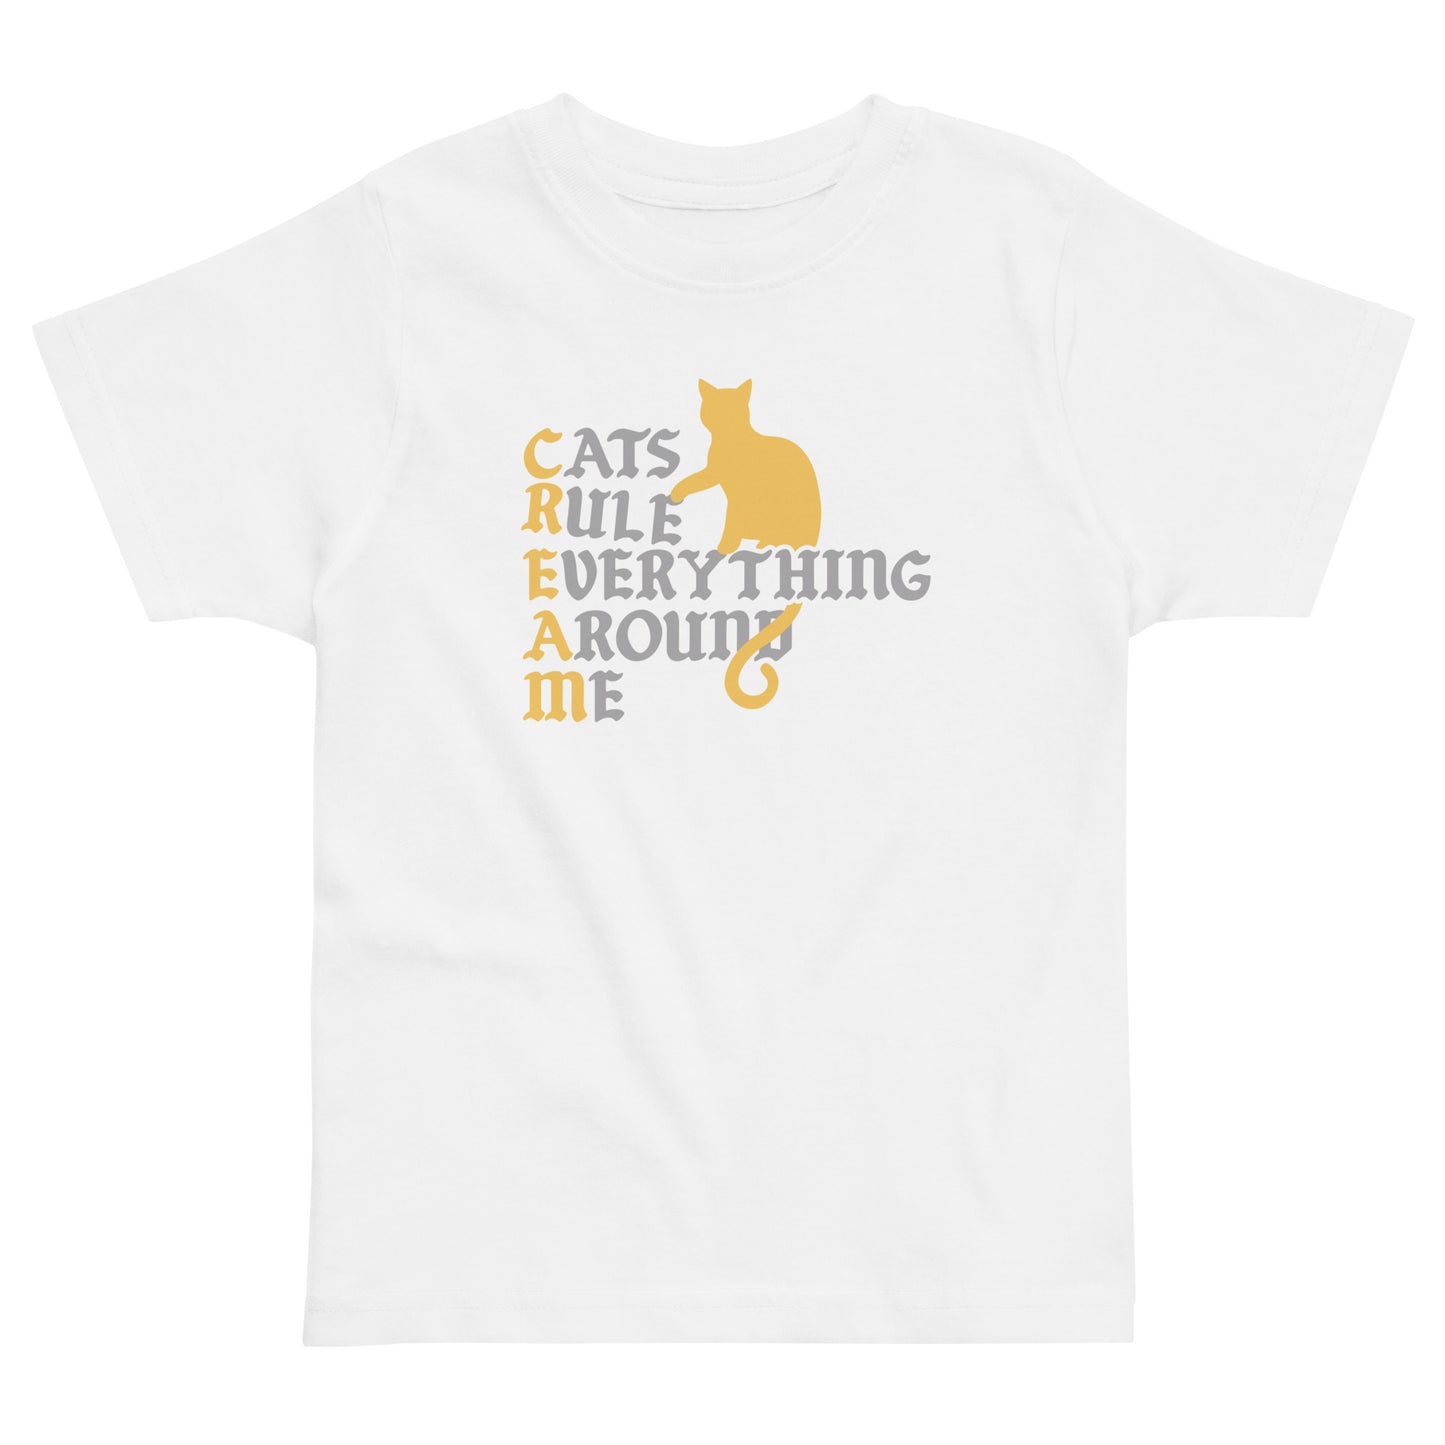 Cats Rule Everything Around Me Kid's Toddler Tee